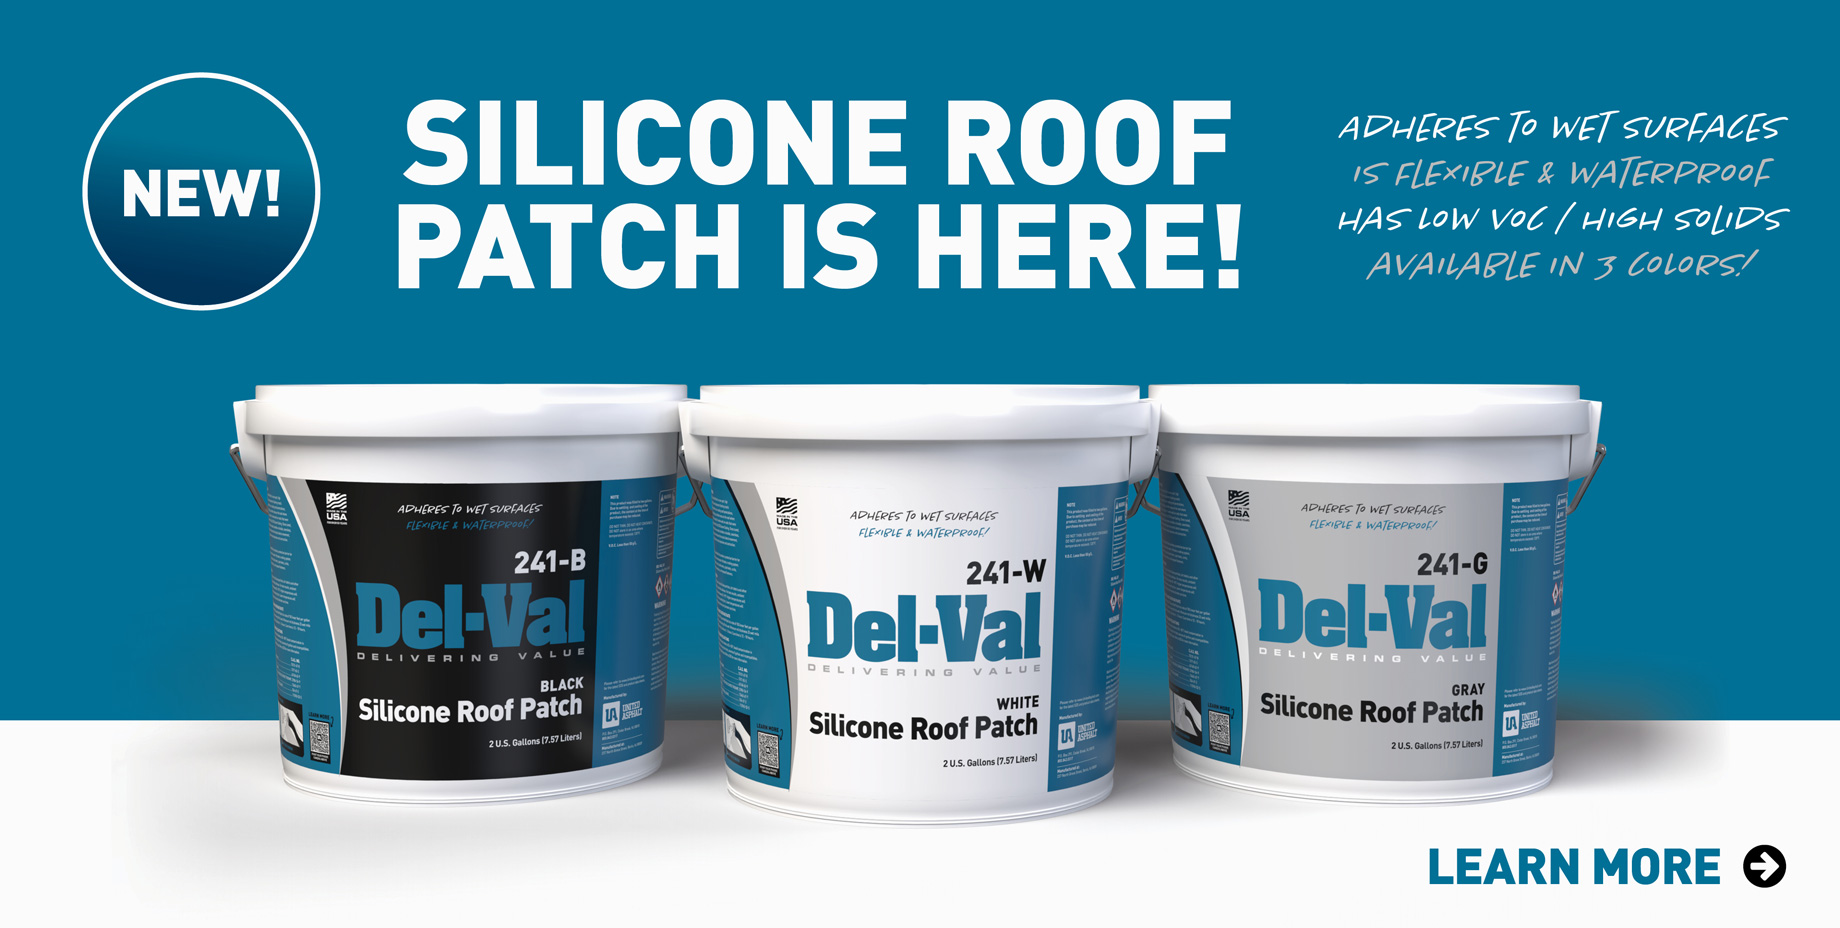 Del-Val 241 Silicone Roof Patch Introduction Hero Slide